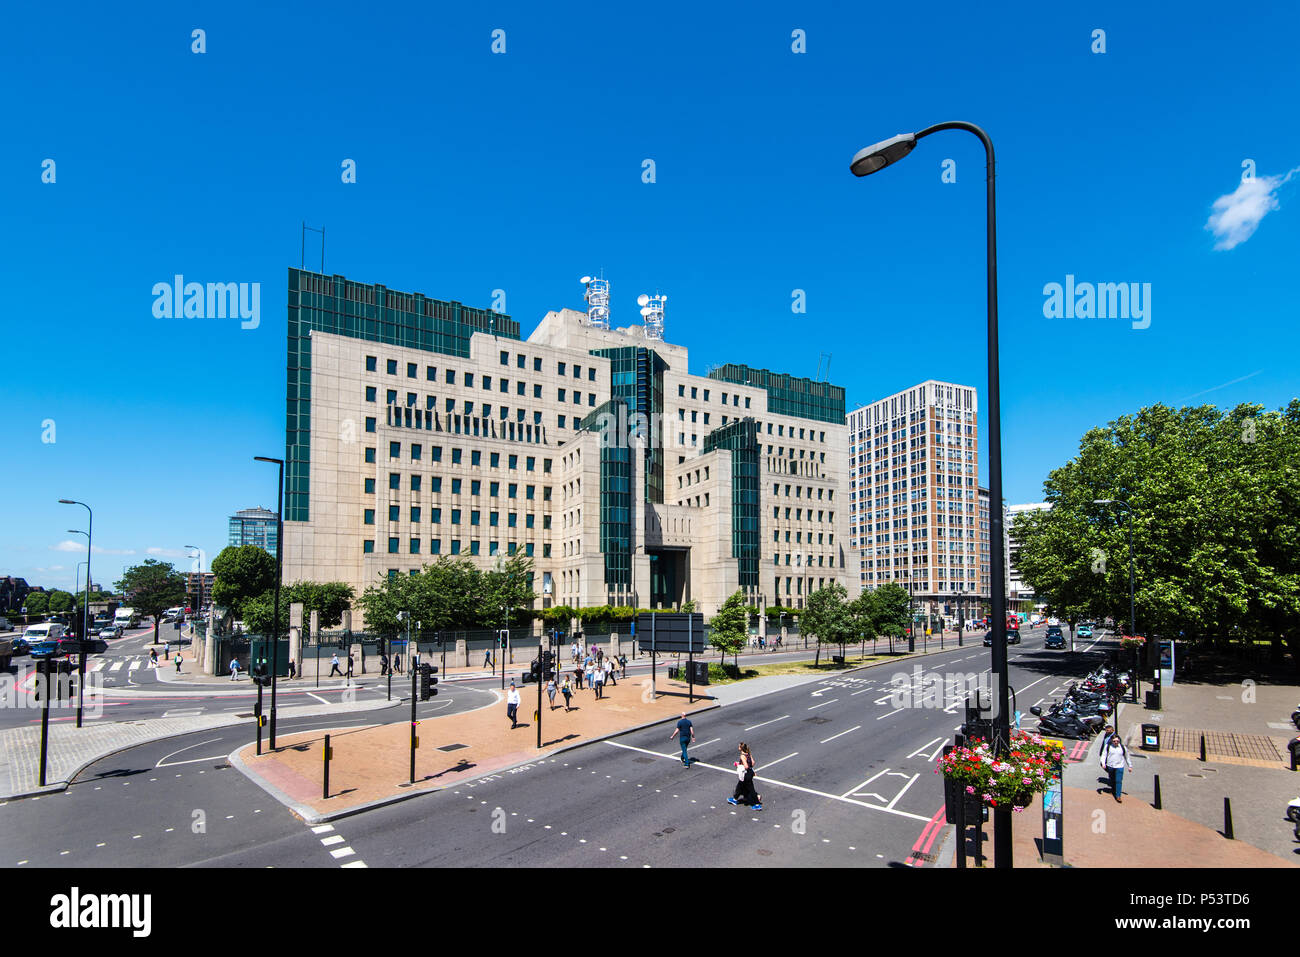 LONDON, UK - 18JUN2018: The SIS Building at Albert Embankment, Vauxhall is the headquarters of MI6. Viewed from the south across Albert Embankment. Stock Photo